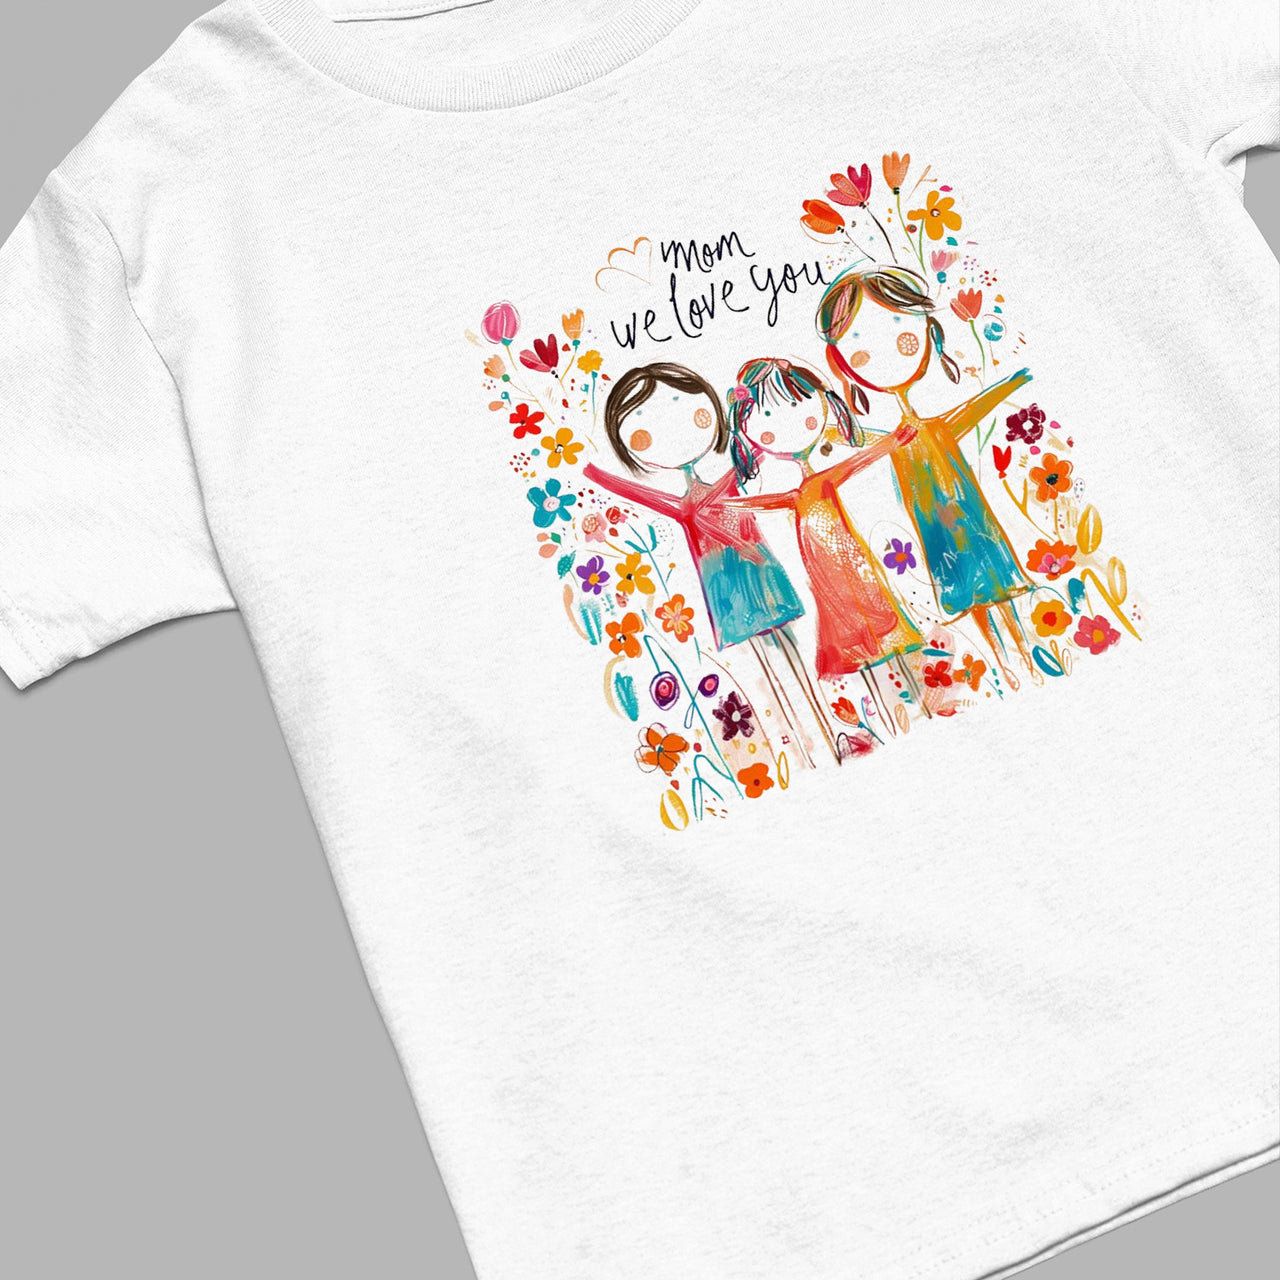 Mom And Children Sweatshirt, Family Drawing Shirt, Kids Drawing Shirt, Mom Shirt With Kids Art, Mama Shirt, Mom Shirt, Mother's Day Gift, Happy Mother's Day